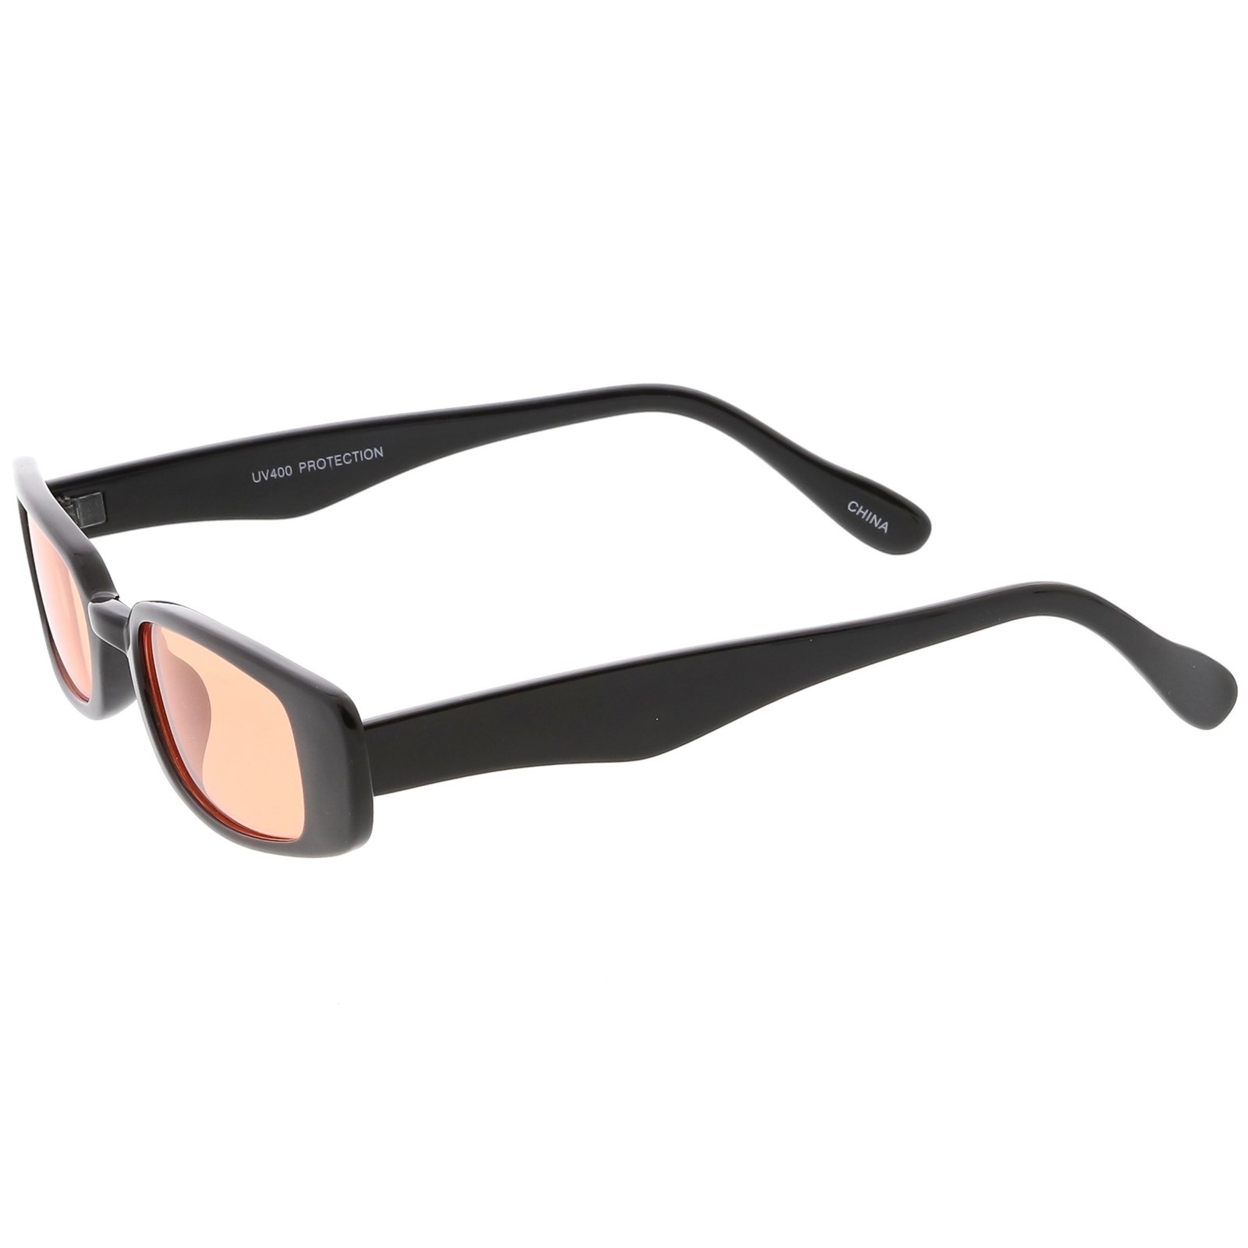 Extreme Thin Small Lens Rectangle Sunglasses Color Tinted 49mm - Black / Red